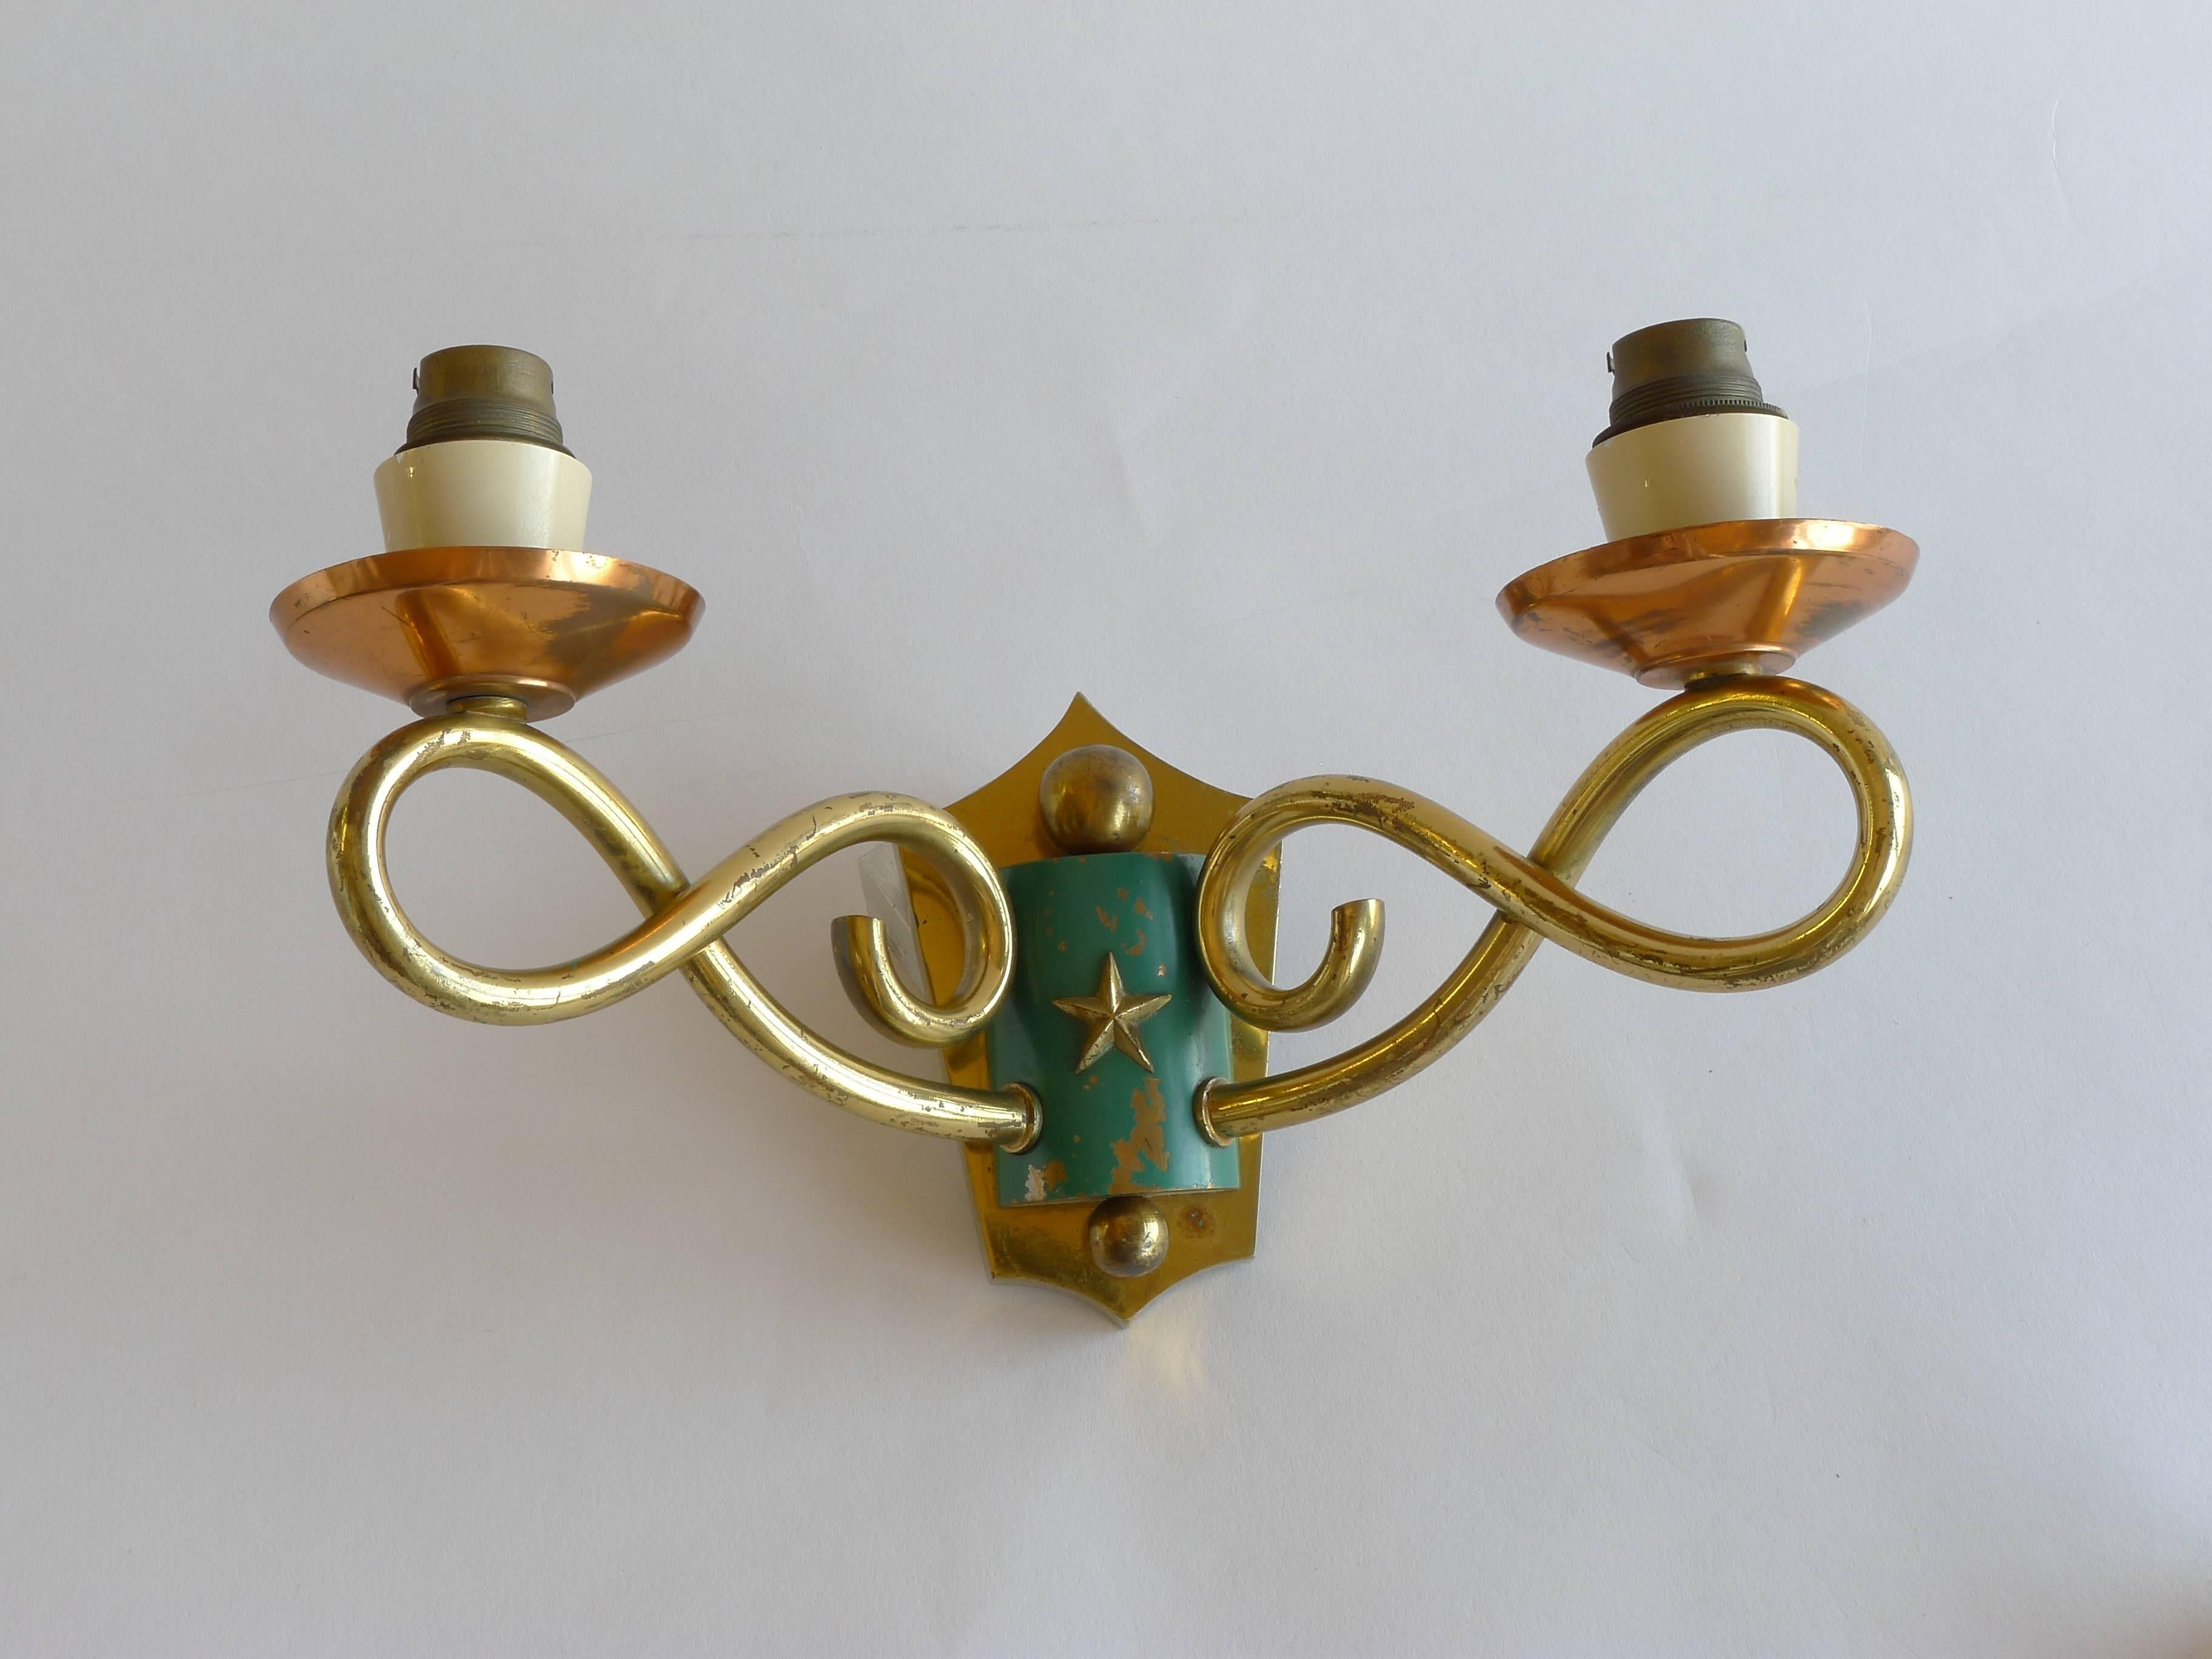 Pair of 1930s French Regency wall sconces. Finished in polished brass, copper and lacquered green. Wired for Europe, conversion for US would be required.

Architect, Sandy Littman of Duesenberg LTD.  and The American Glass Light Company have been